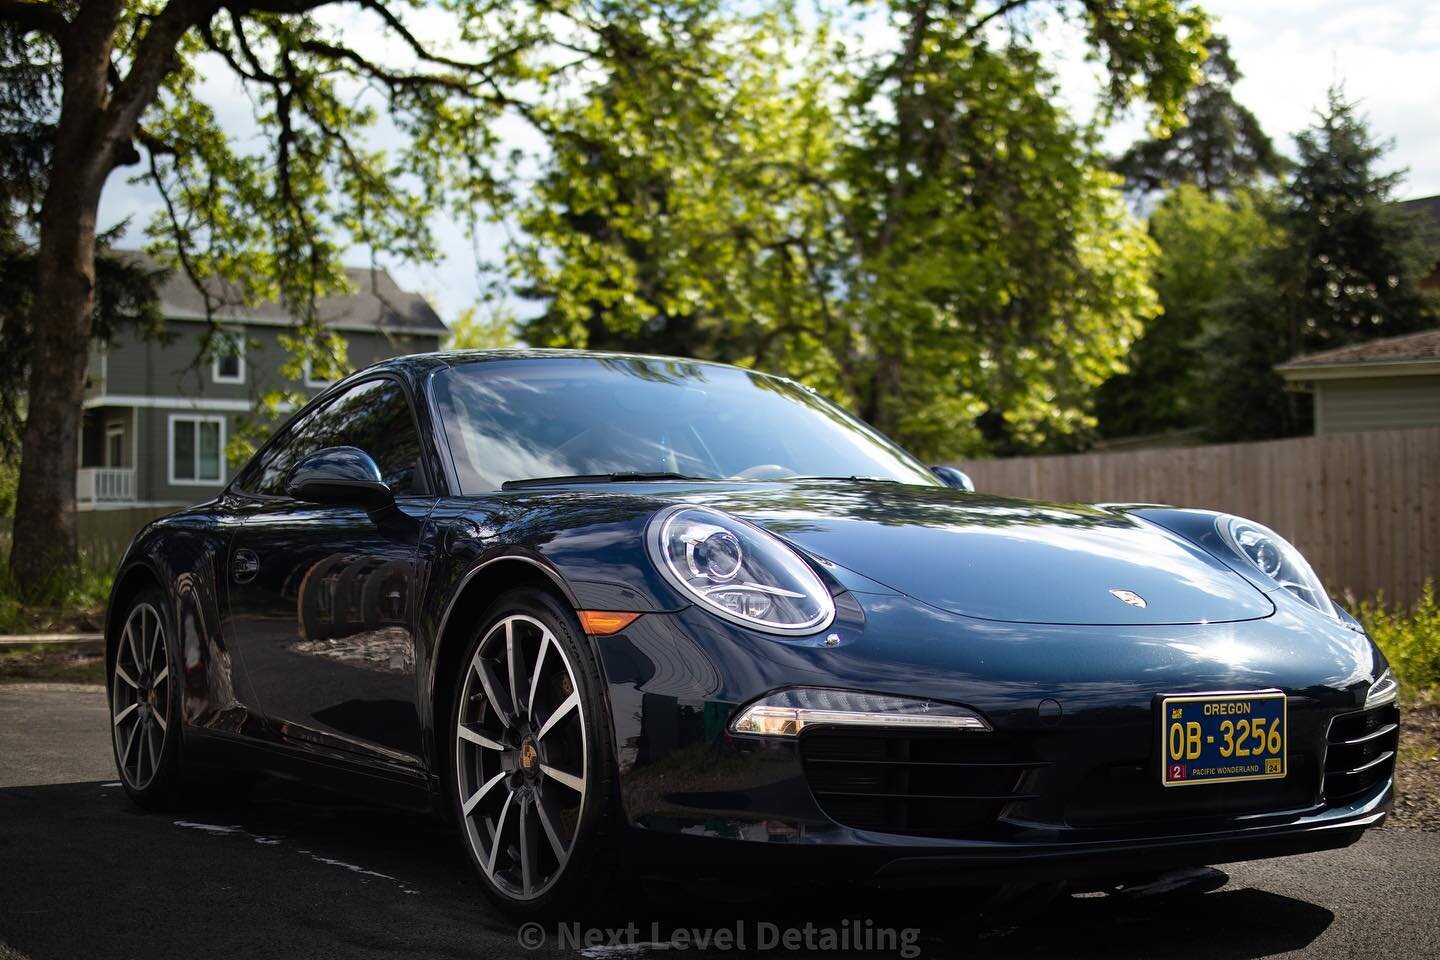 Porsche 911 

Came in for a Exterior Detail
&bull;
&bull;
&bull;
&bull;
#porsche #porsche911 #German #sportscar #racecar #car #cars #carporn #carphotography #carsofinstagram #ig #photography #photooftheday #photoshoot #photographer #picoftheday #pict